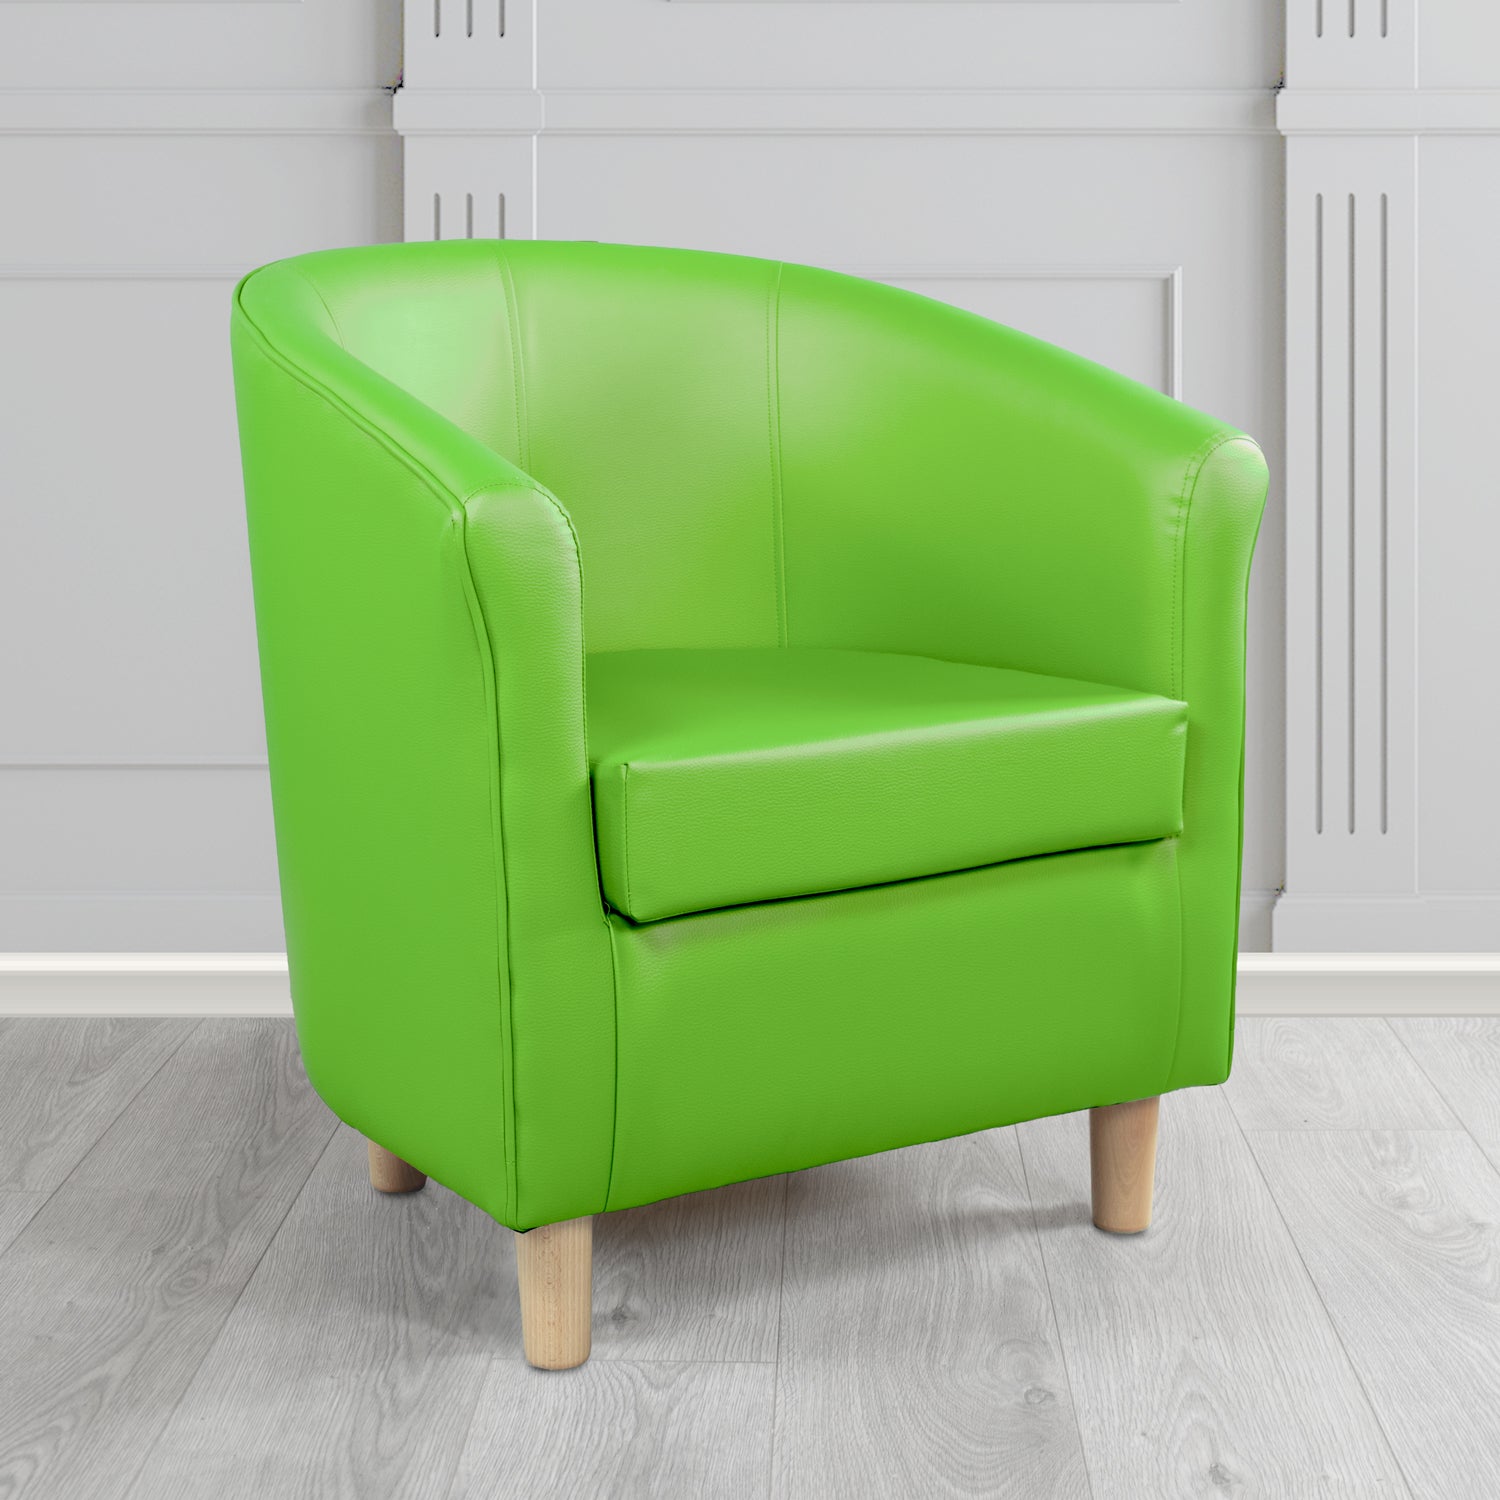 Tuscany Tub Chair in Madrid Lime Faux Leather - The Tub Chair Shop